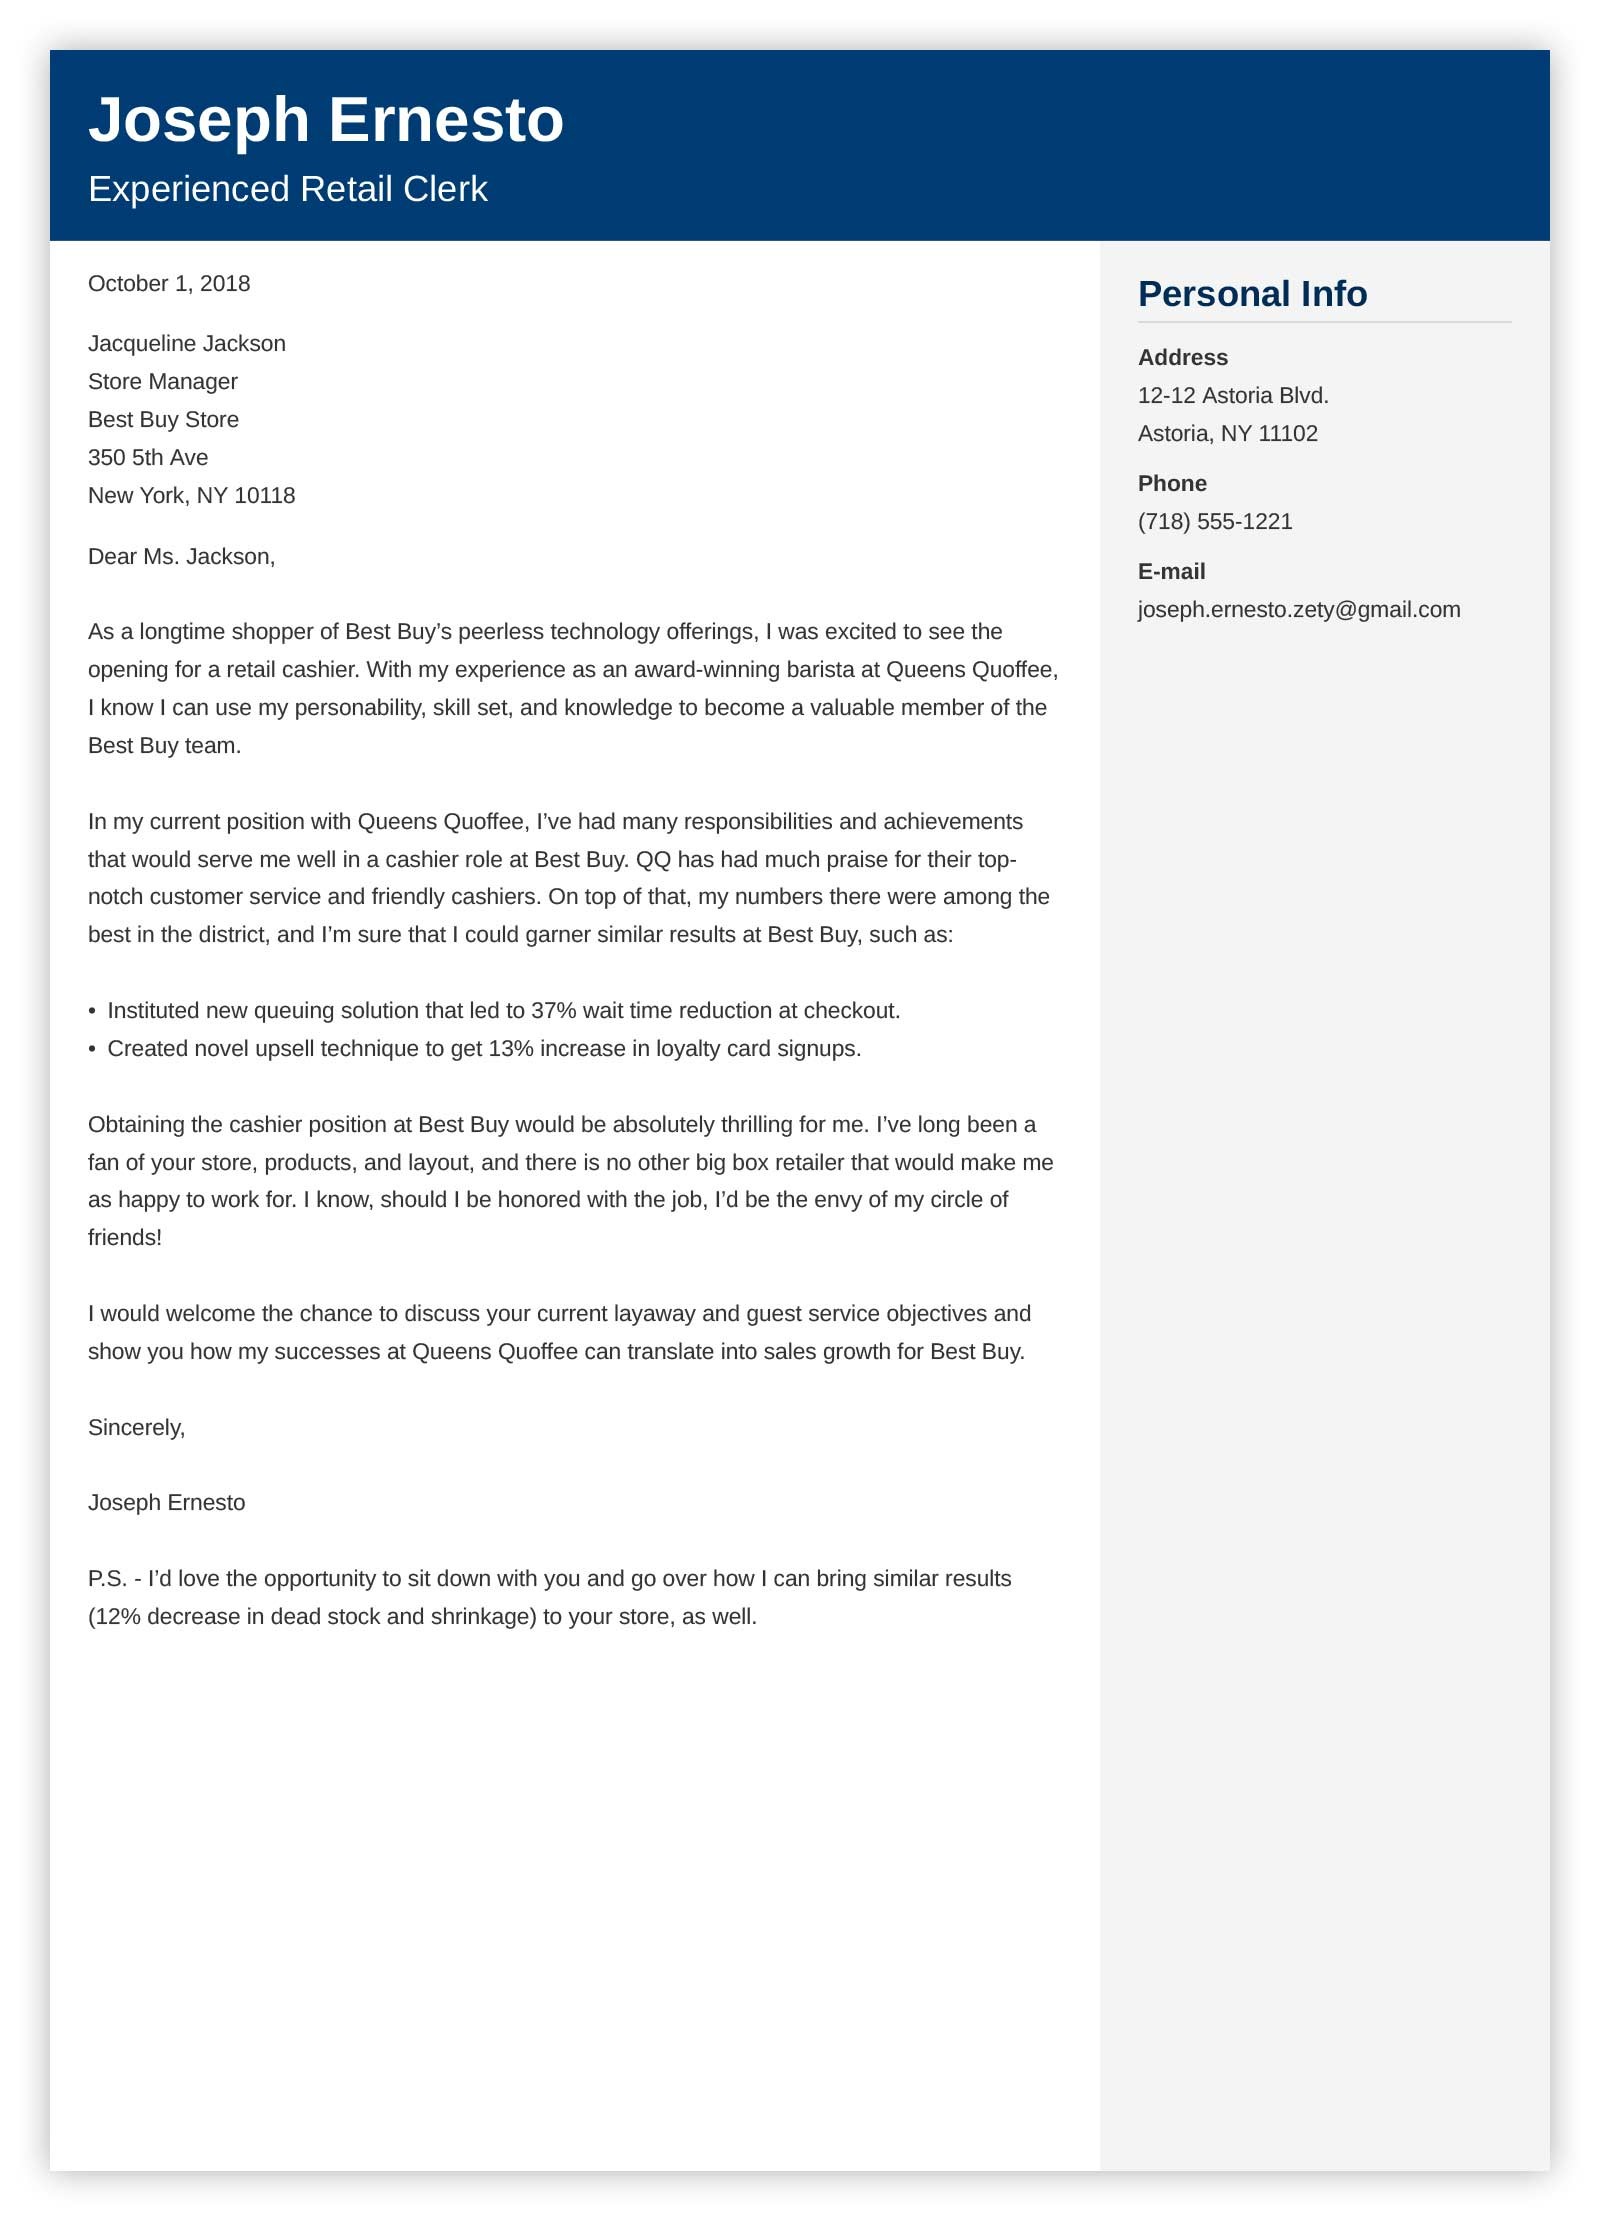 Sample Retail Cover Letter from cdn-images.zety.com